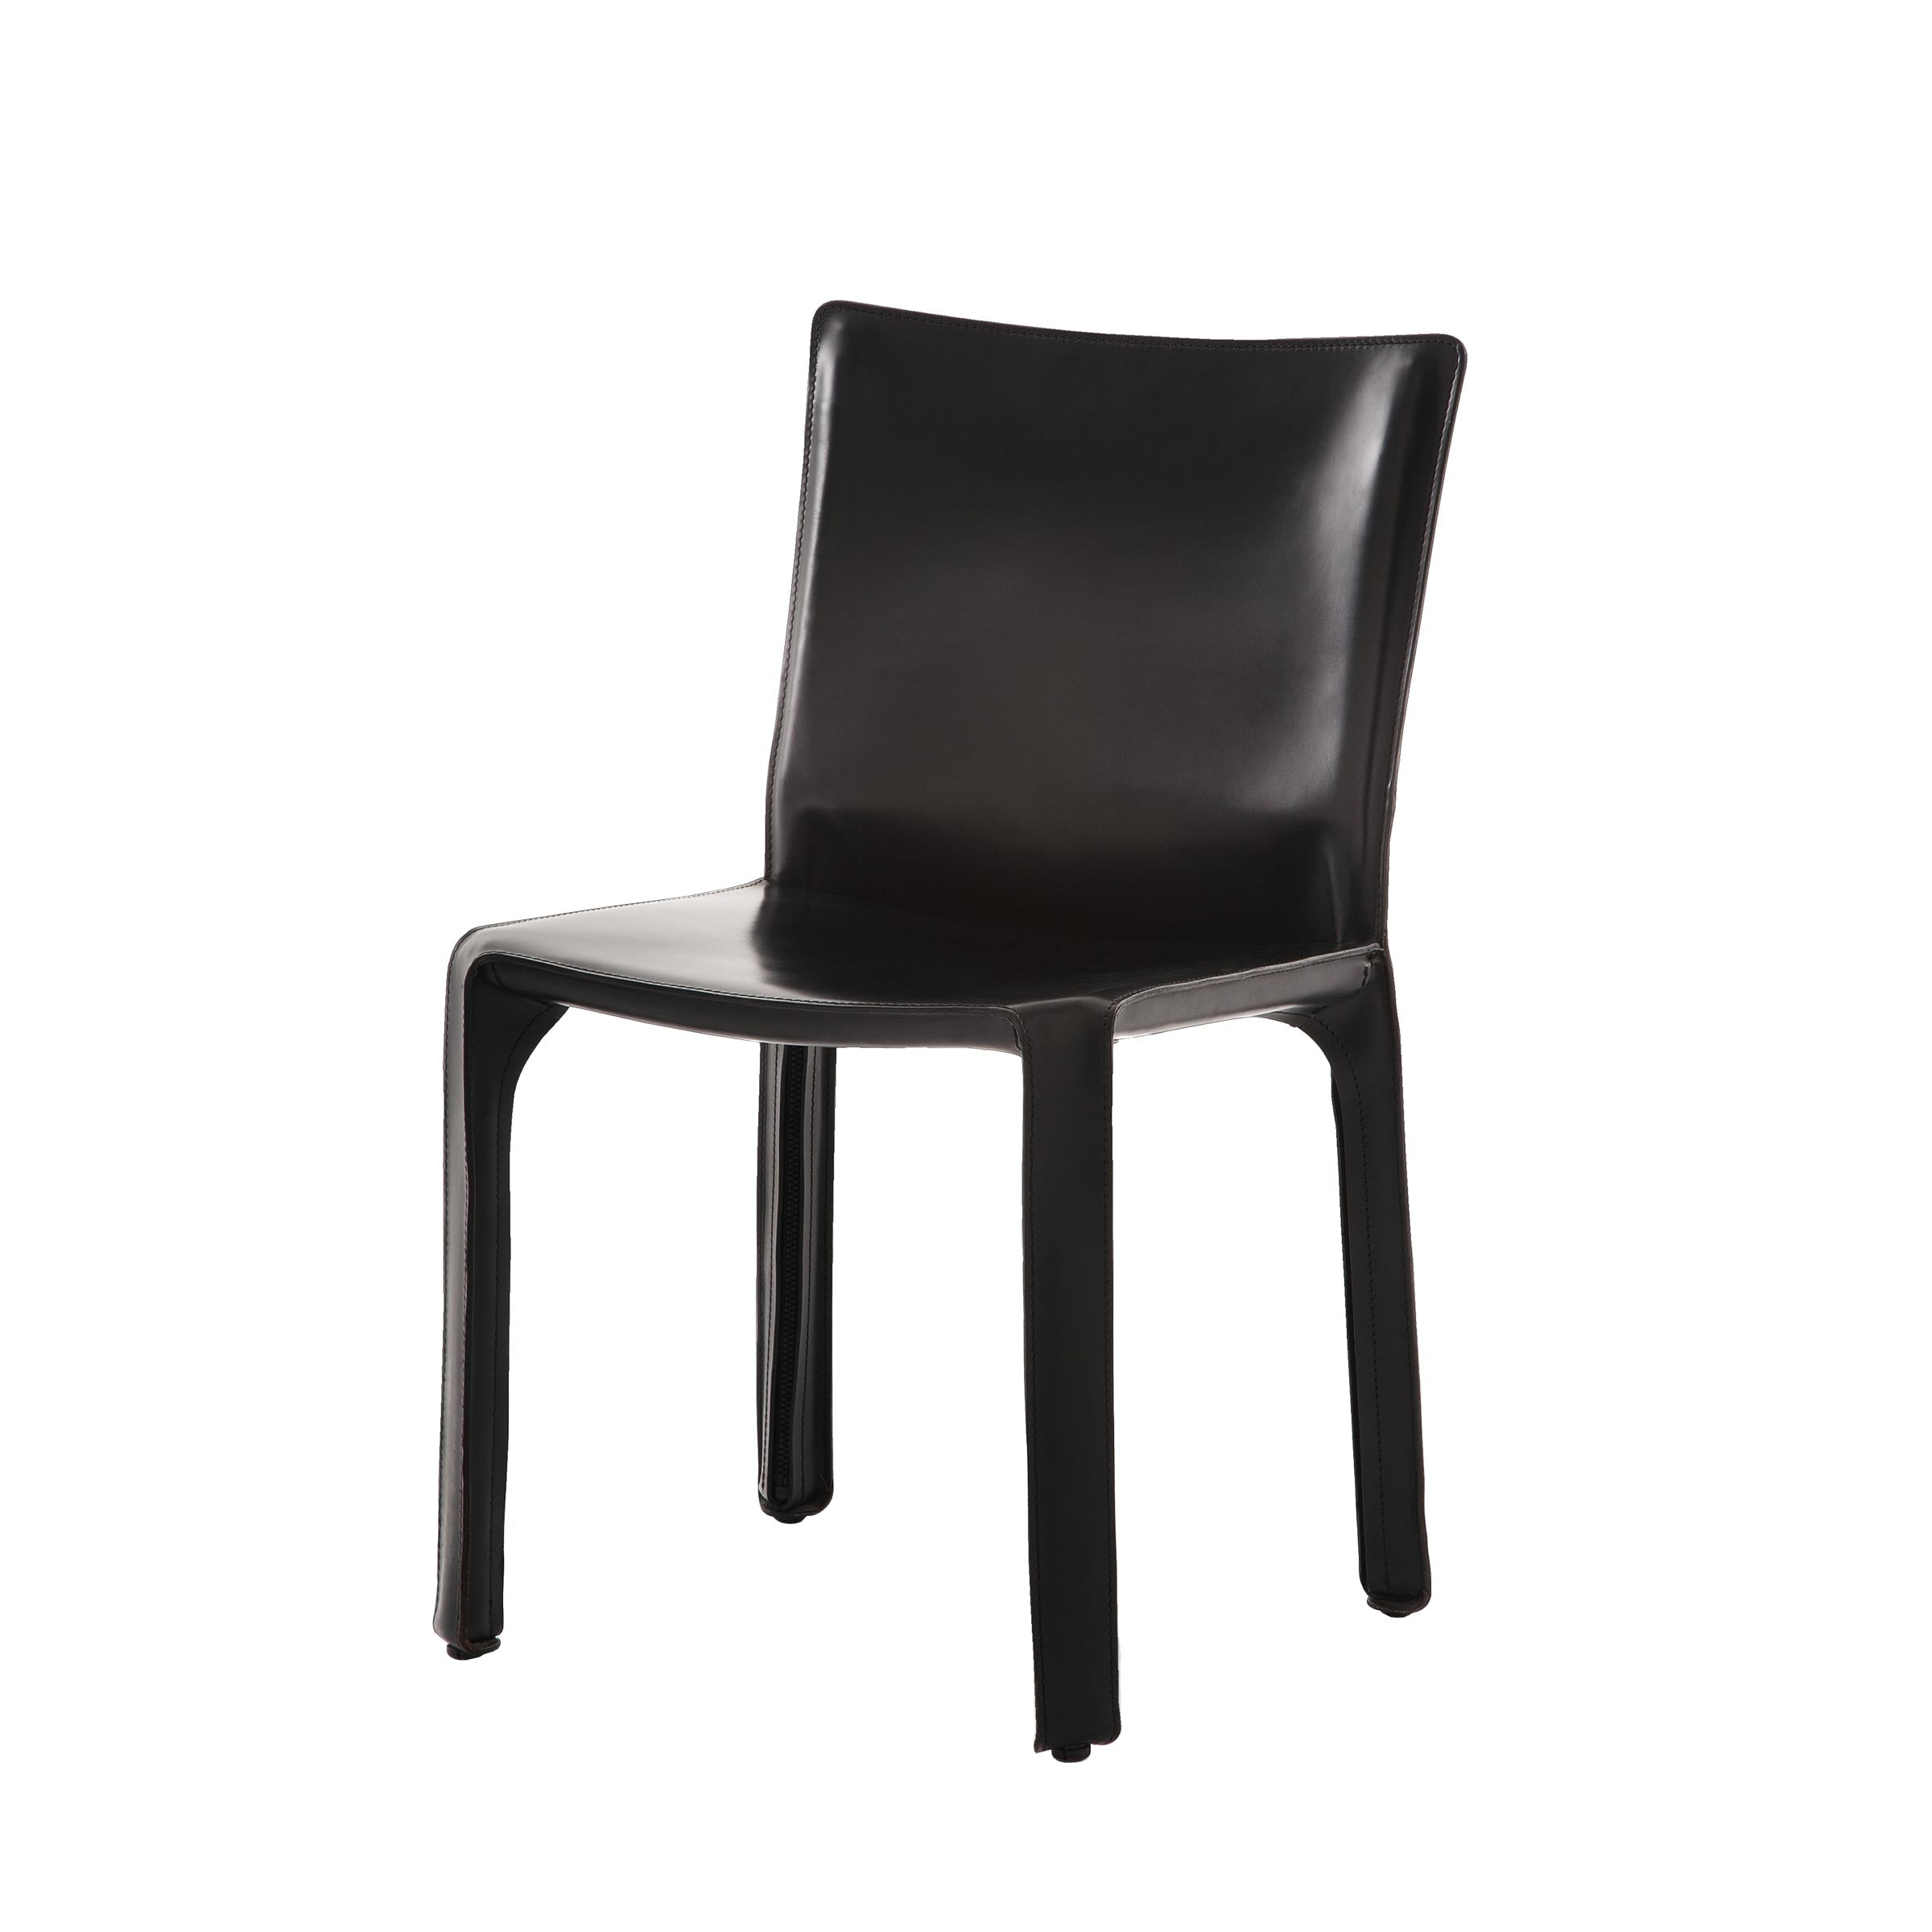 Leather Chair CAB 412 by Mario Bellini for Cassina – Design Italy